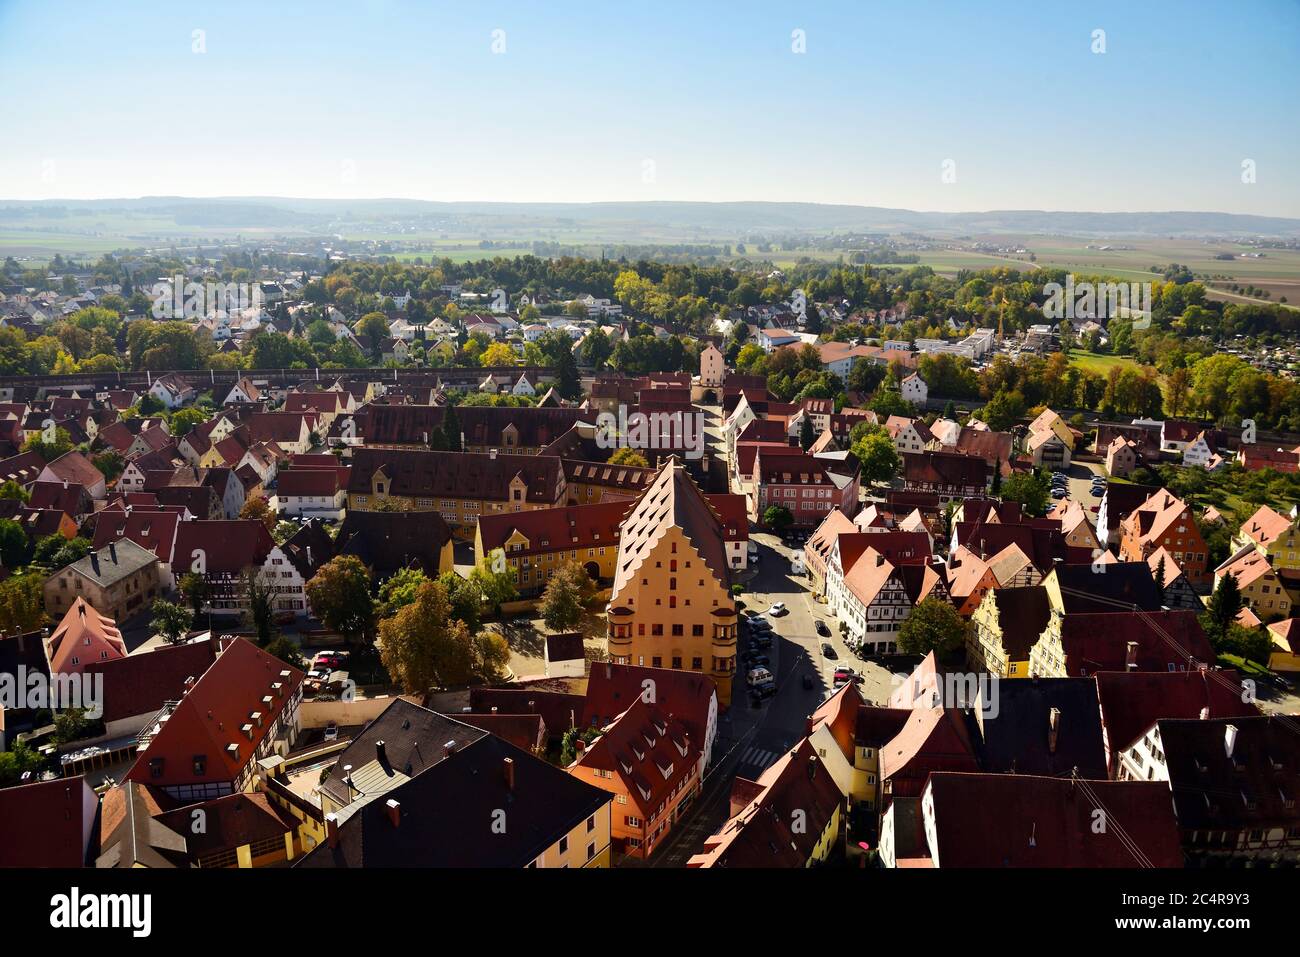 Looking down from The Tower of St. Georges Church at The Middle Ages History City of Nördlingen, Bavaria, Germany, Europe. Stock Photo